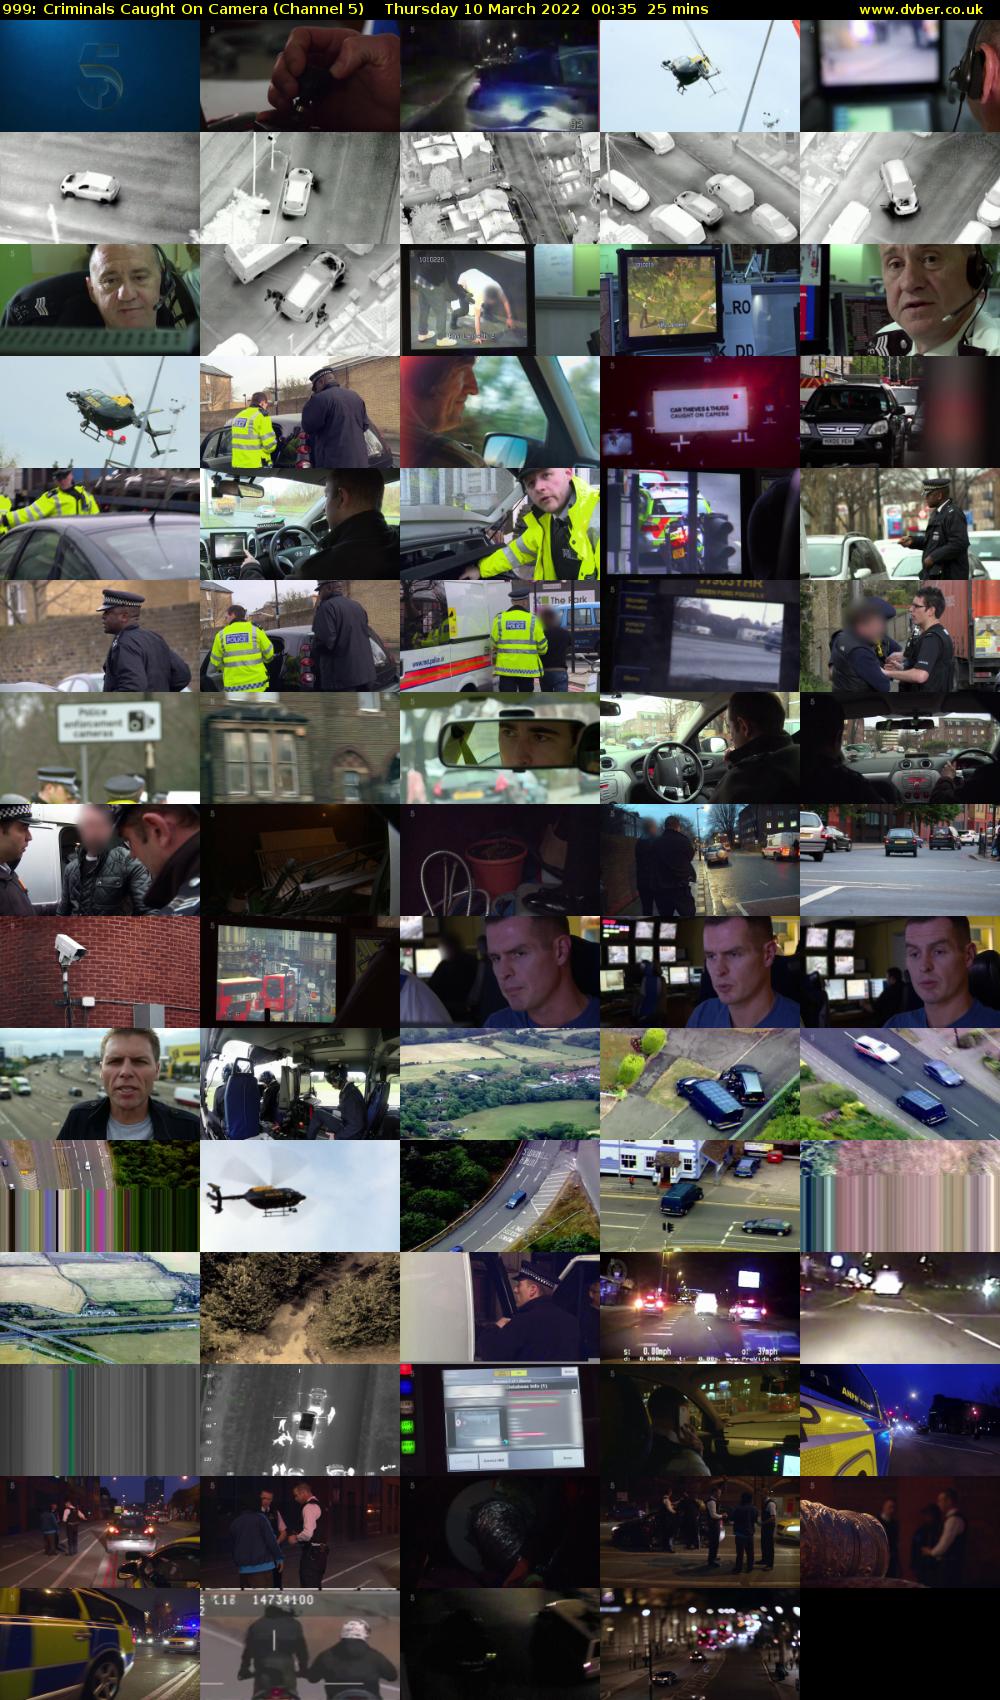 999: Criminals Caught On Camera (Channel 5) Thursday 10 March 2022 00:35 - 01:00